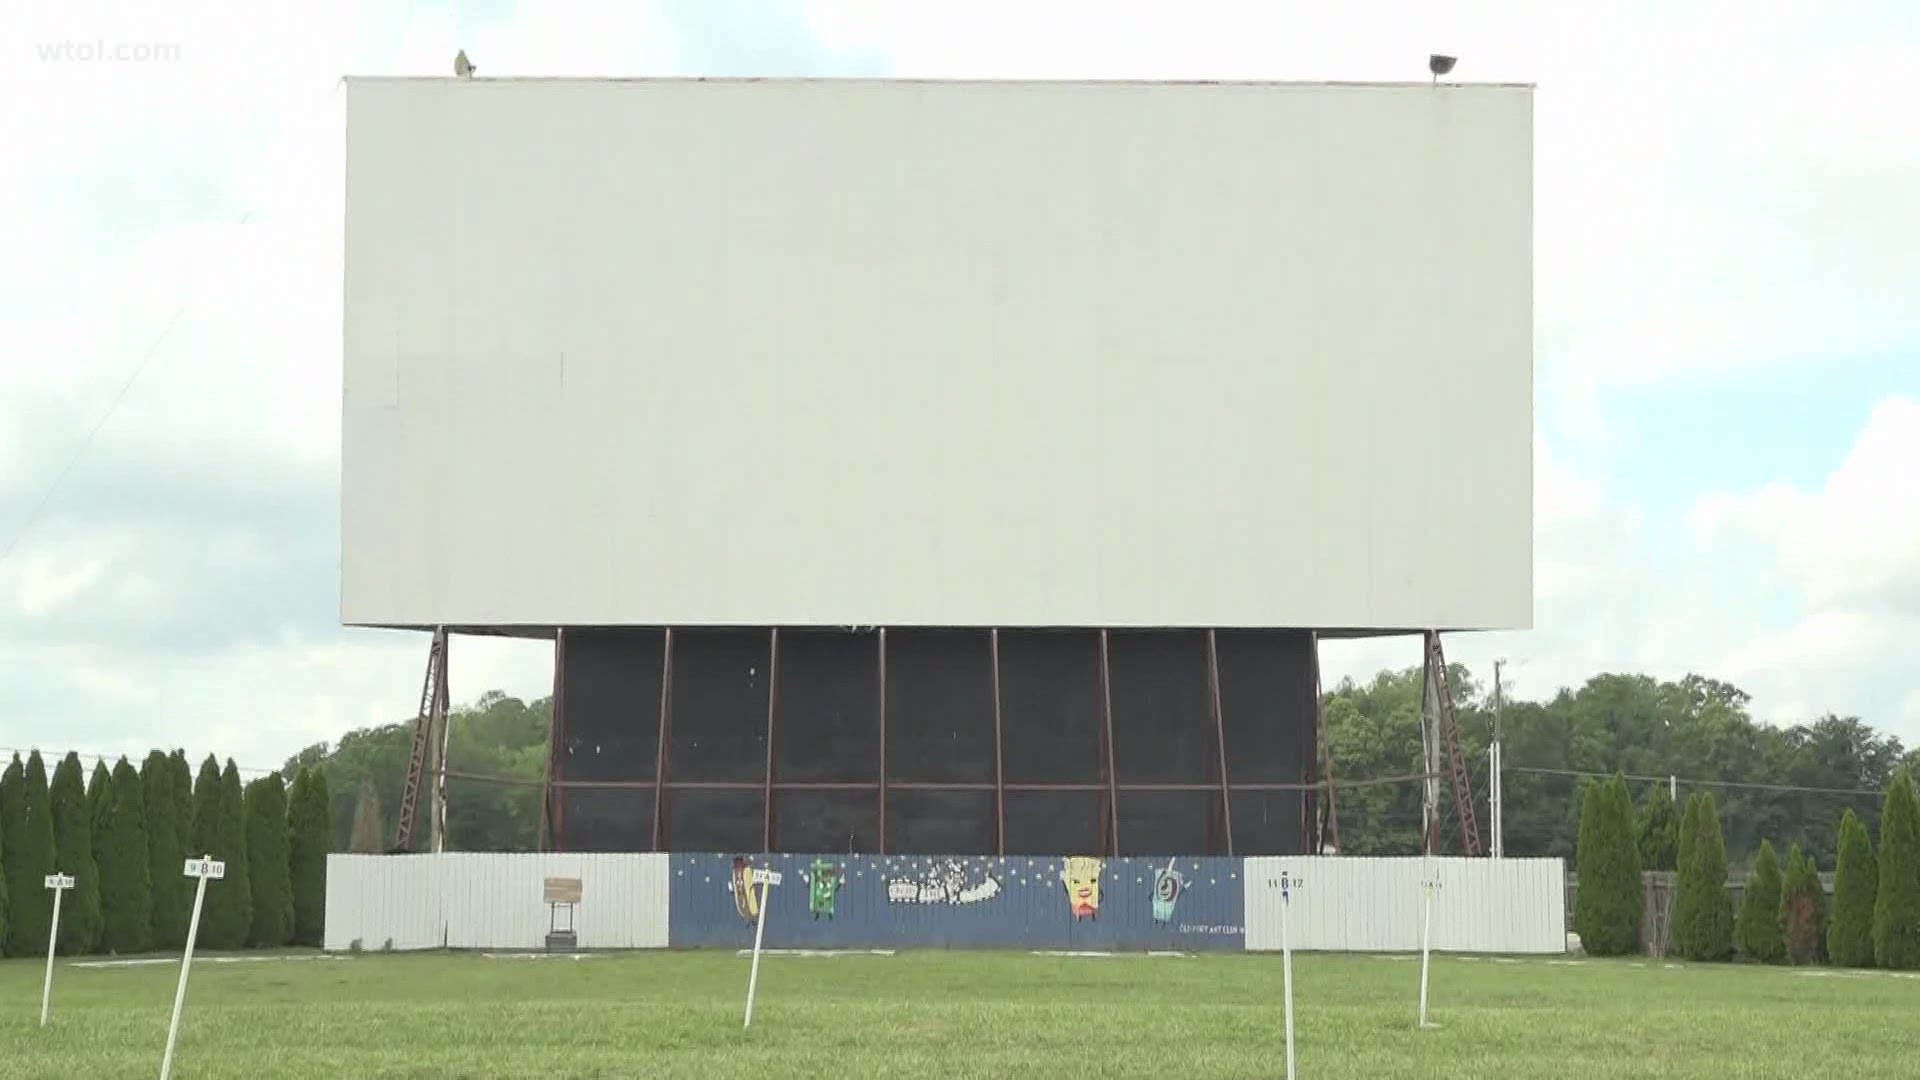 The primary project will be the demolition and replacement of the 84-foot widescreen, which was built in 1949.